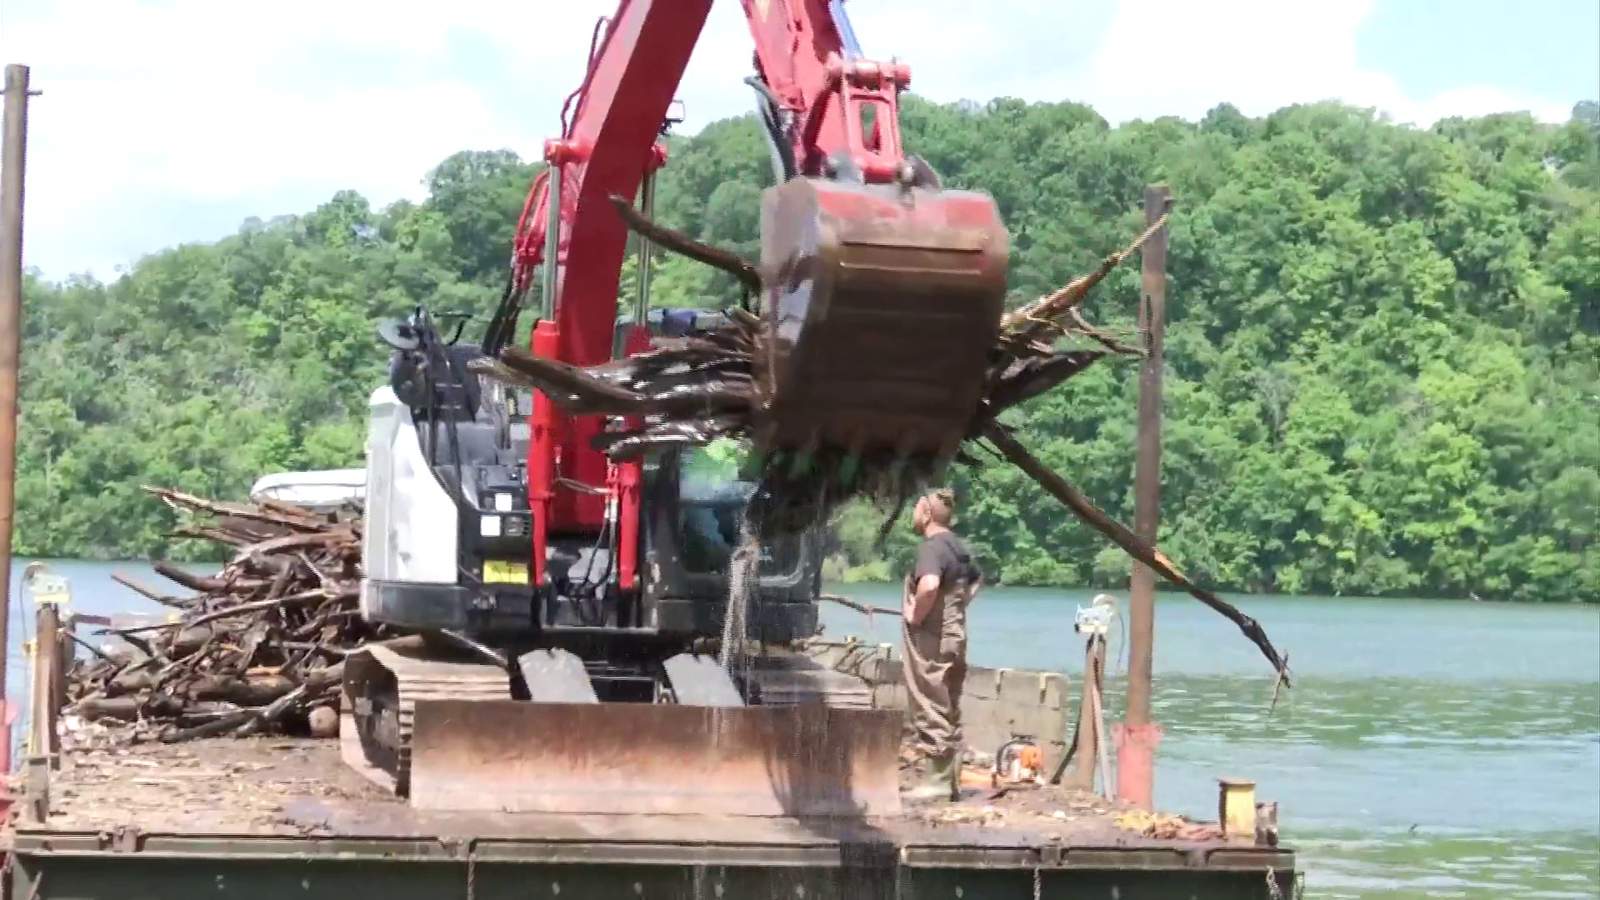 Nonprofit helping remove debris from Claytor Lake